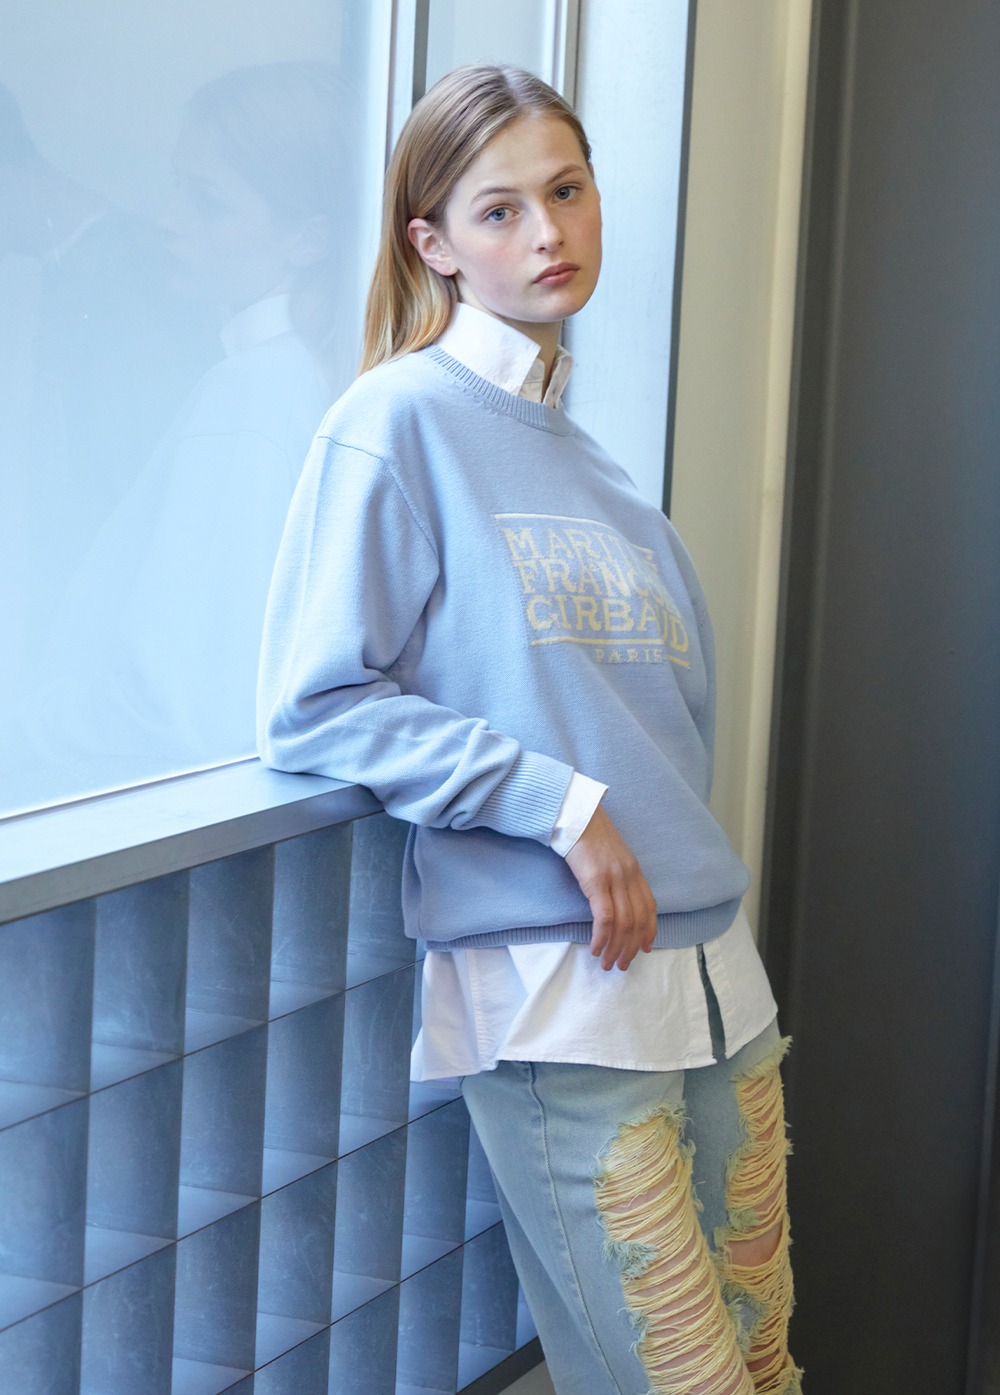 CLASSIC LOGO KNIT PULLOVER sky blue